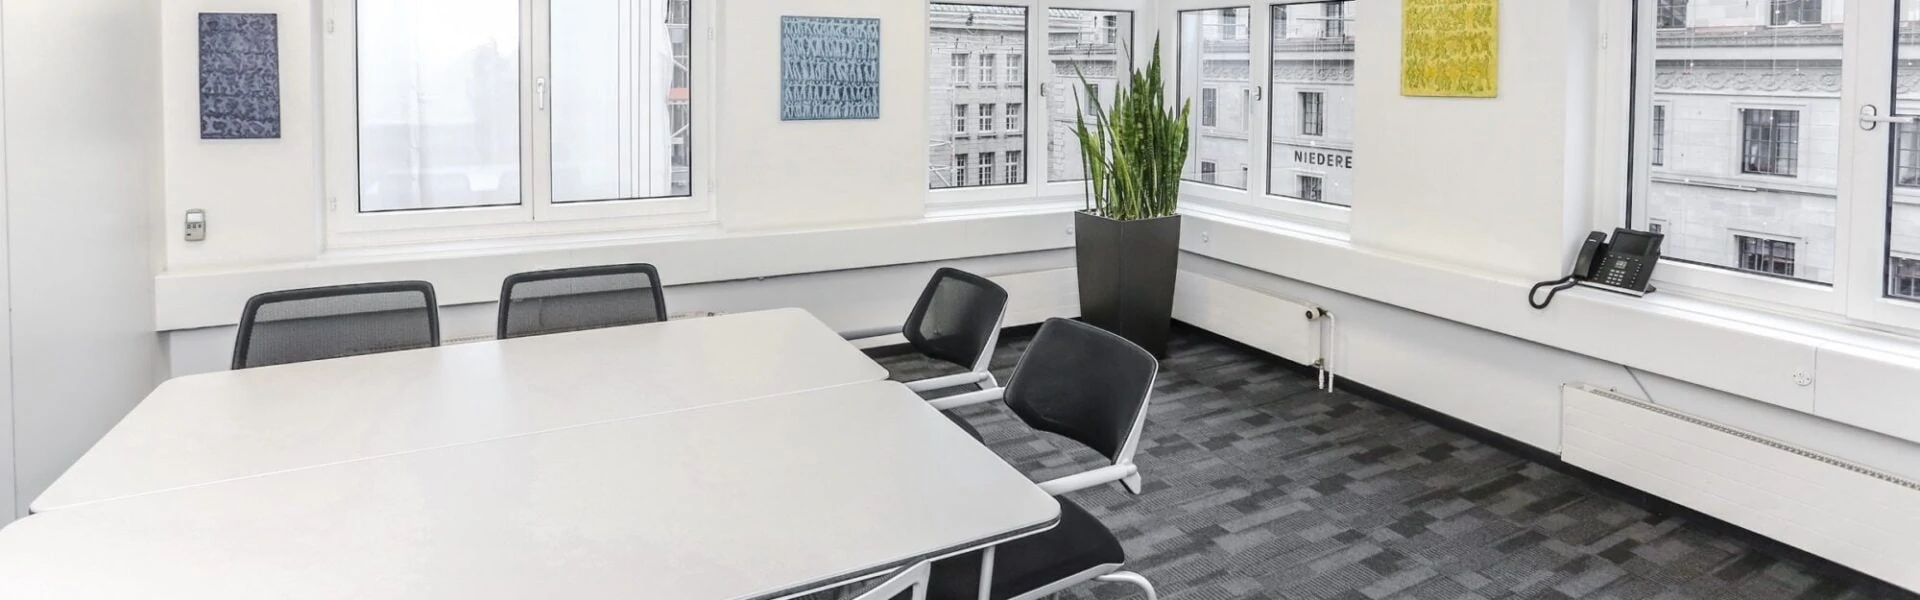 Meeting room for 6 people in Zurich